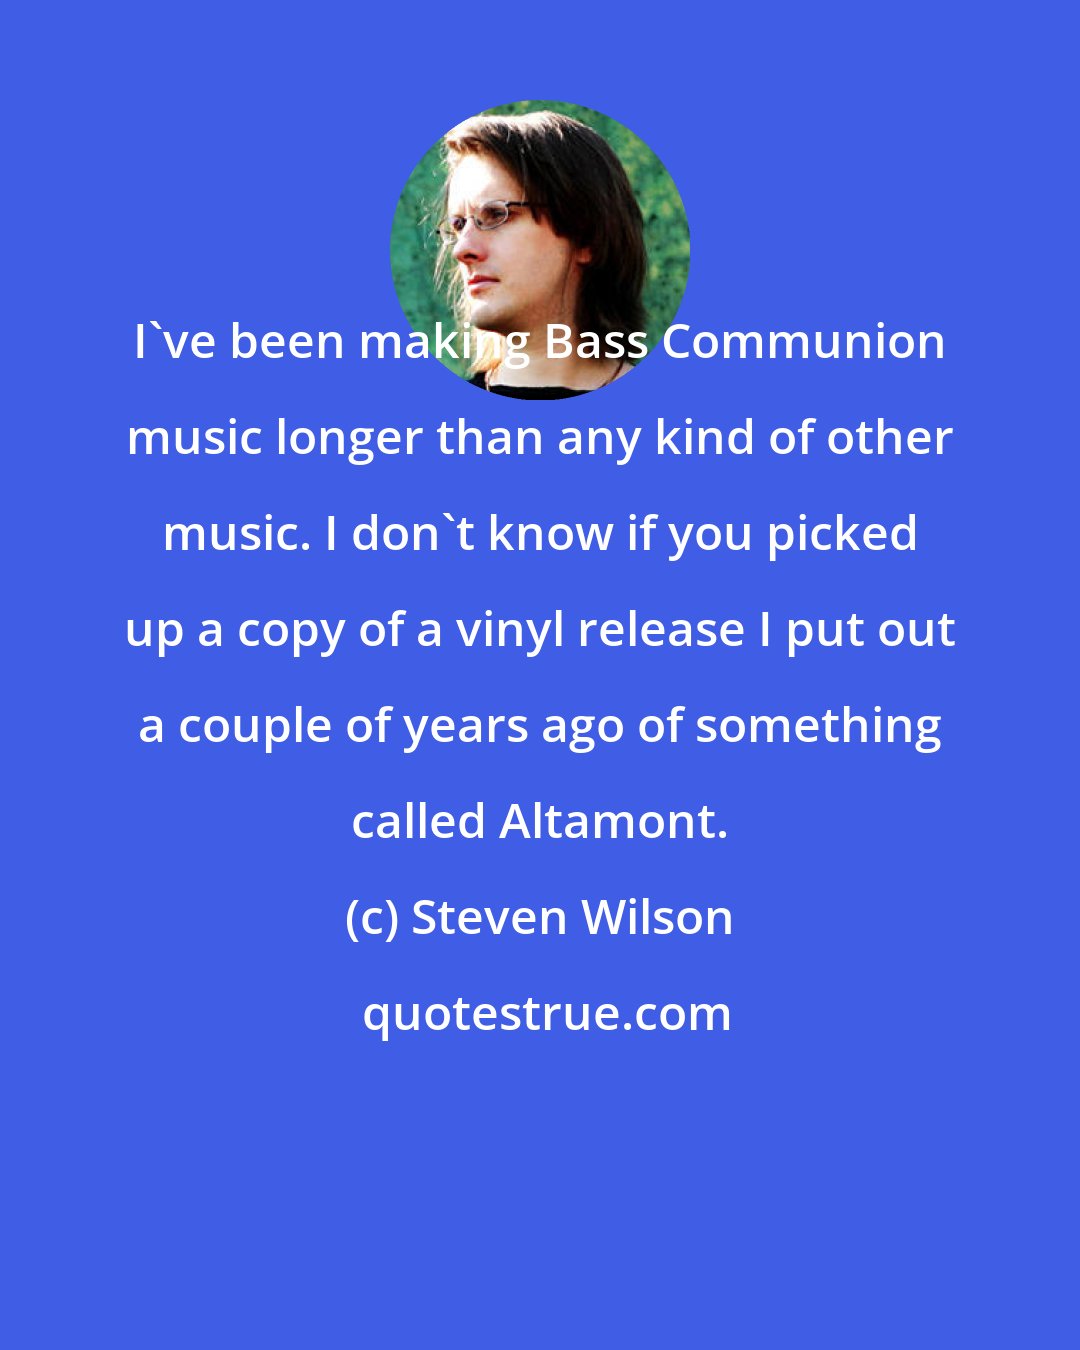 Steven Wilson: I've been making Bass Communion music longer than any kind of other music. I don't know if you picked up a copy of a vinyl release I put out a couple of years ago of something called Altamont.